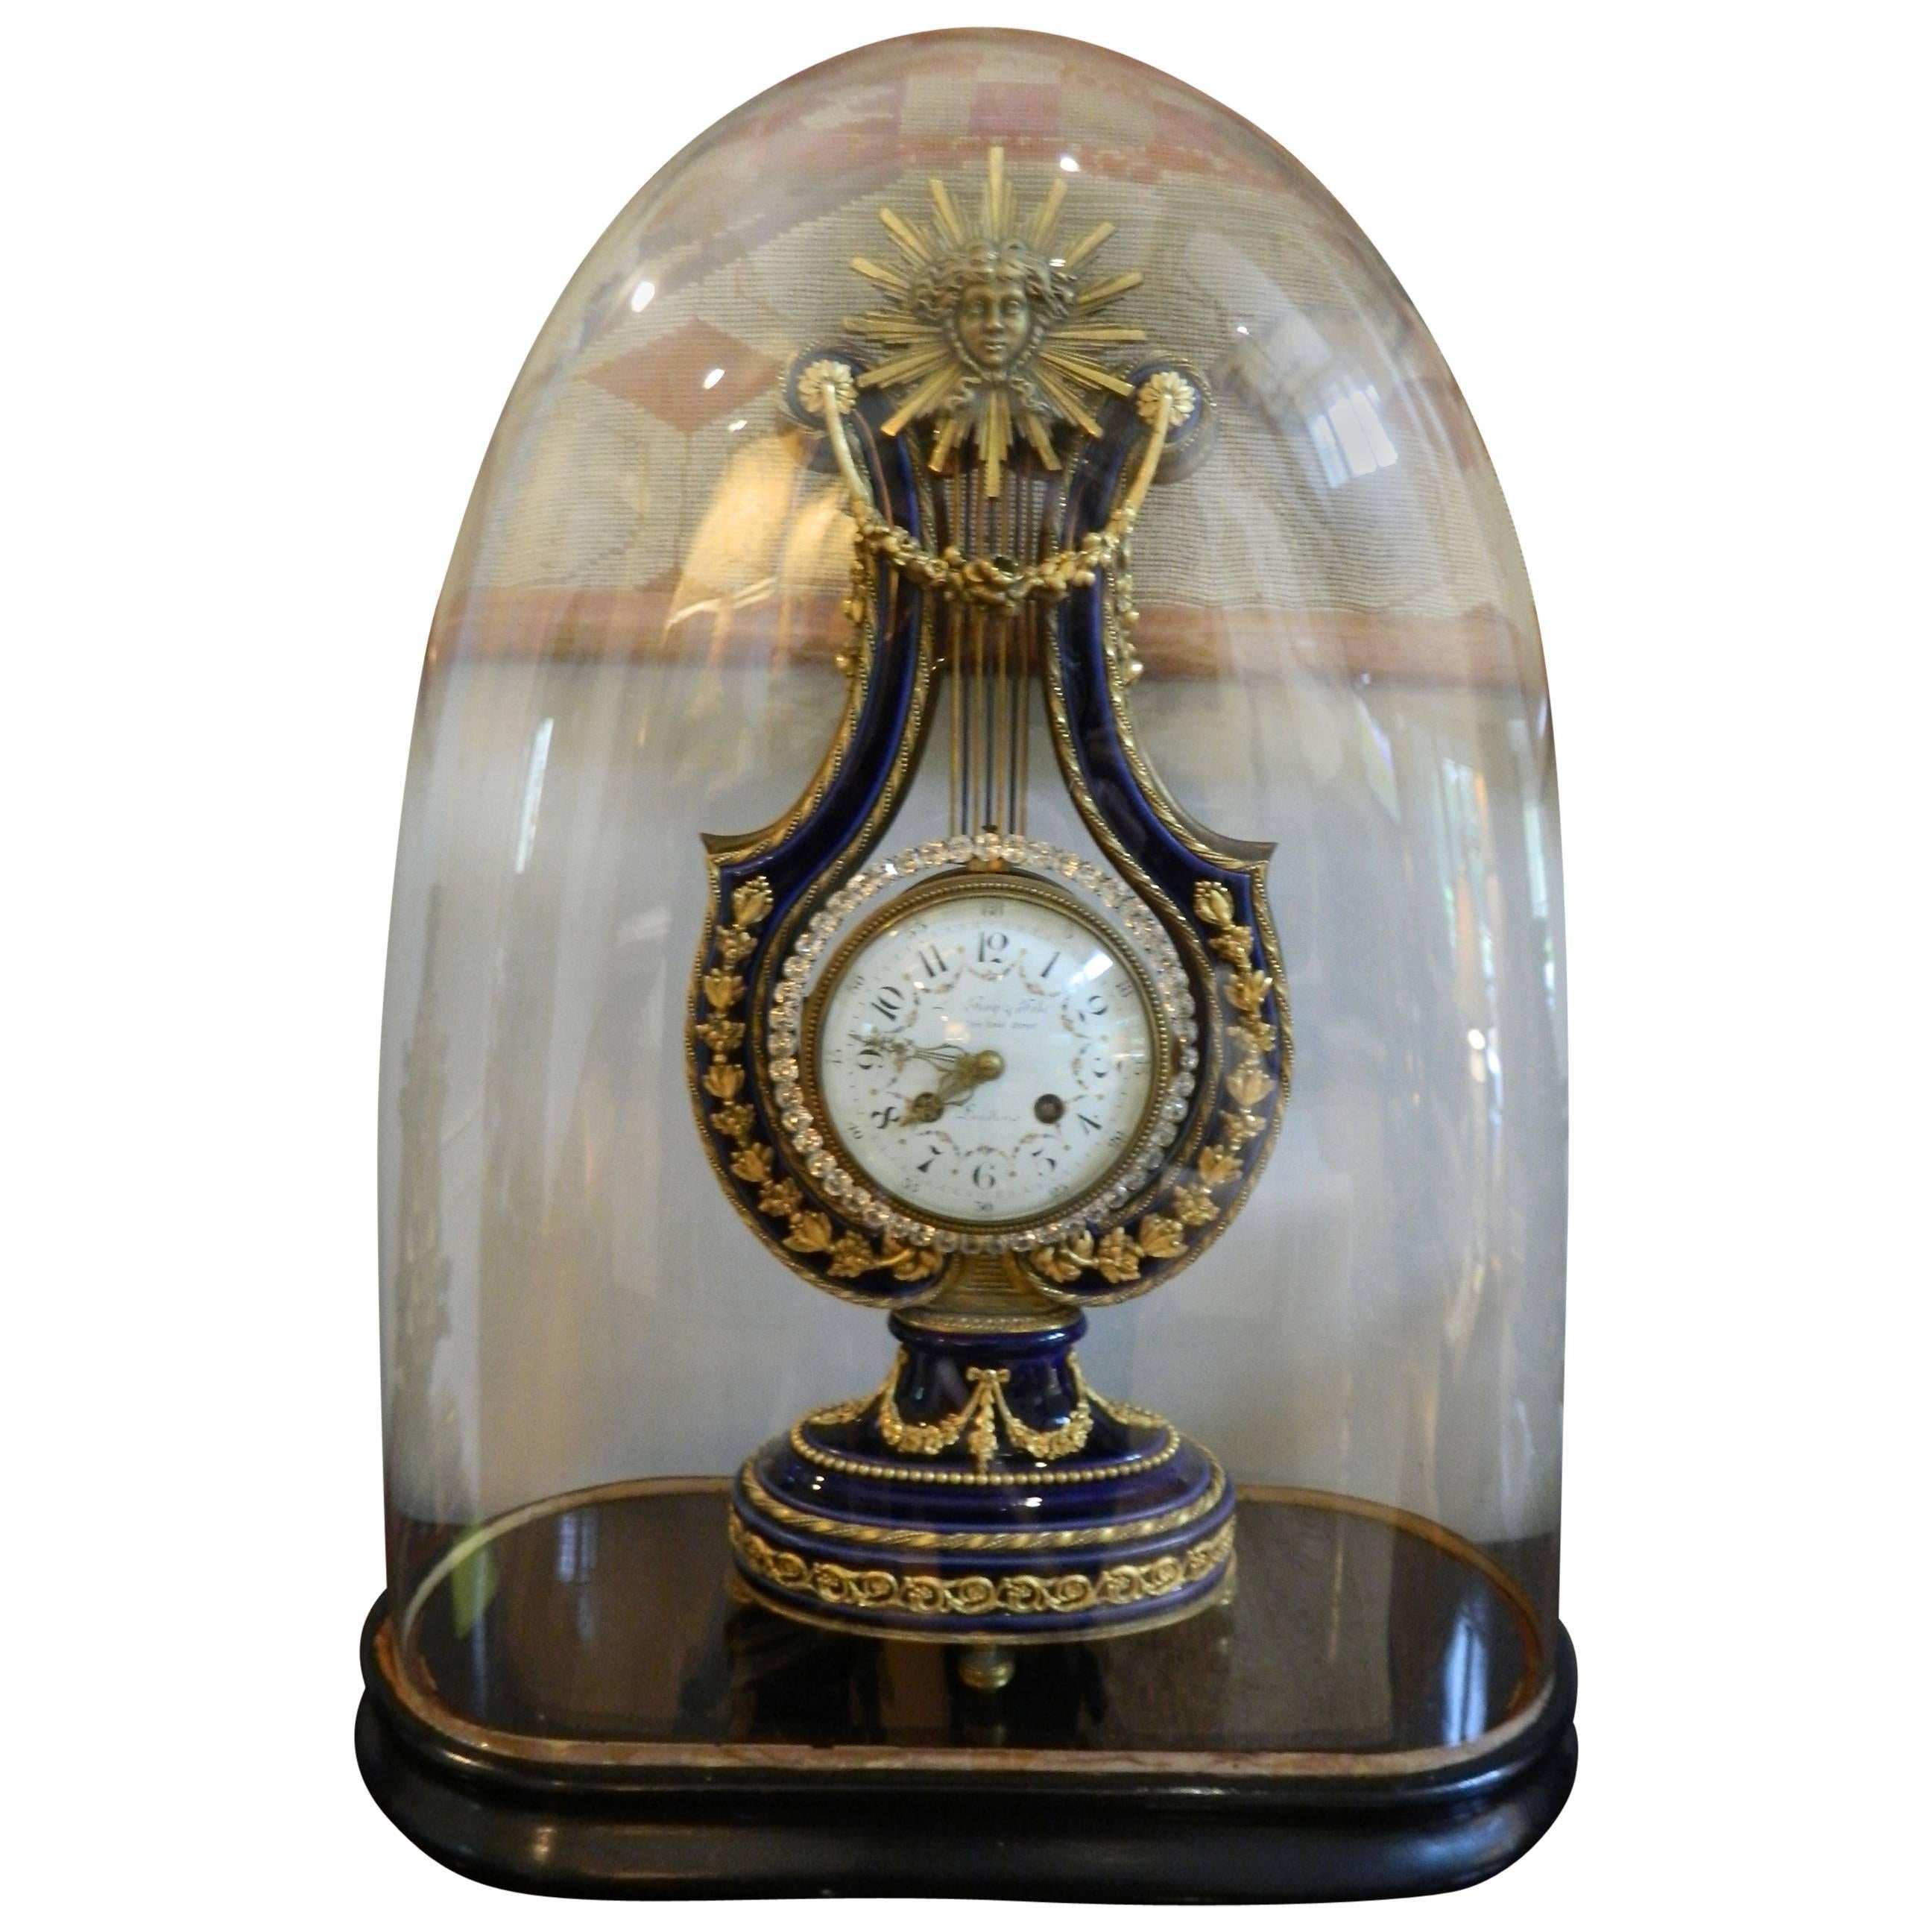 French Lyre Mantel Clock with Glass Dome, Third Quarter of the 19th Century